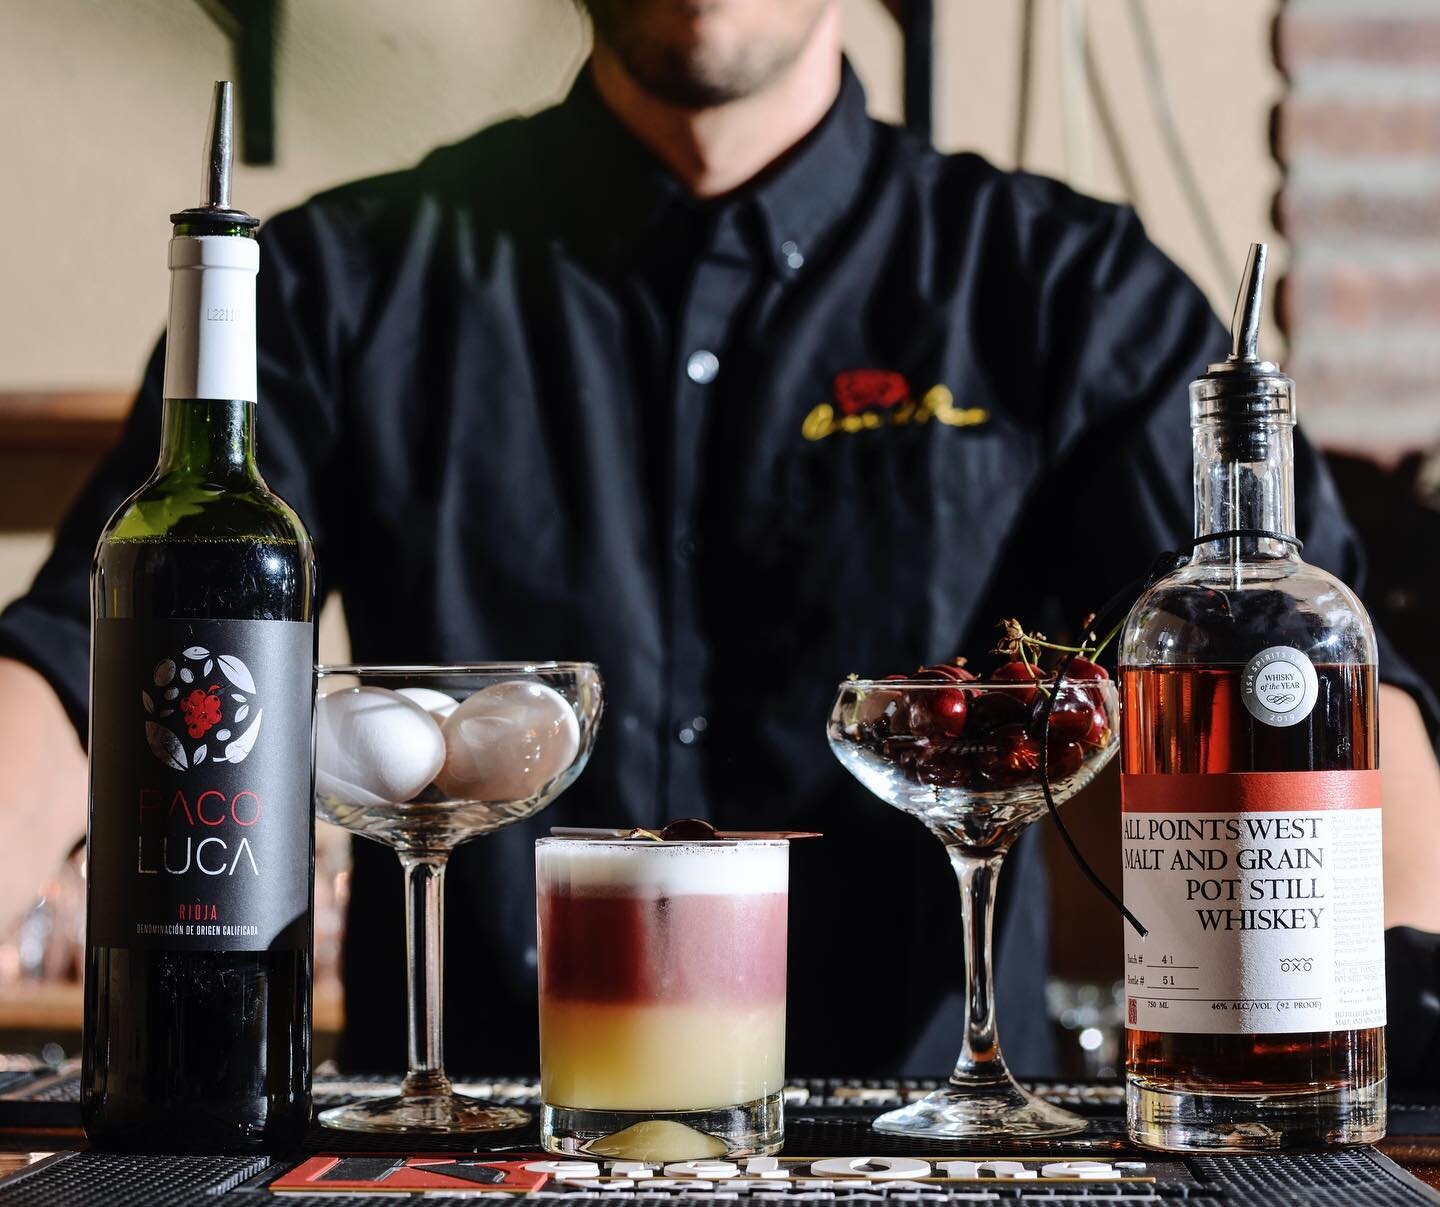 What it takes to make great cocktails&hellip;it&rsquo;s the person behind it.

VOTE FOR YOUR FAVORITE! Please tag @allpointswestdistillery &amp; @shakenewark with hashtags #shakenewark and #allpointswestdistillery
.
.
.
#newarknj #ironboundnewark #ne